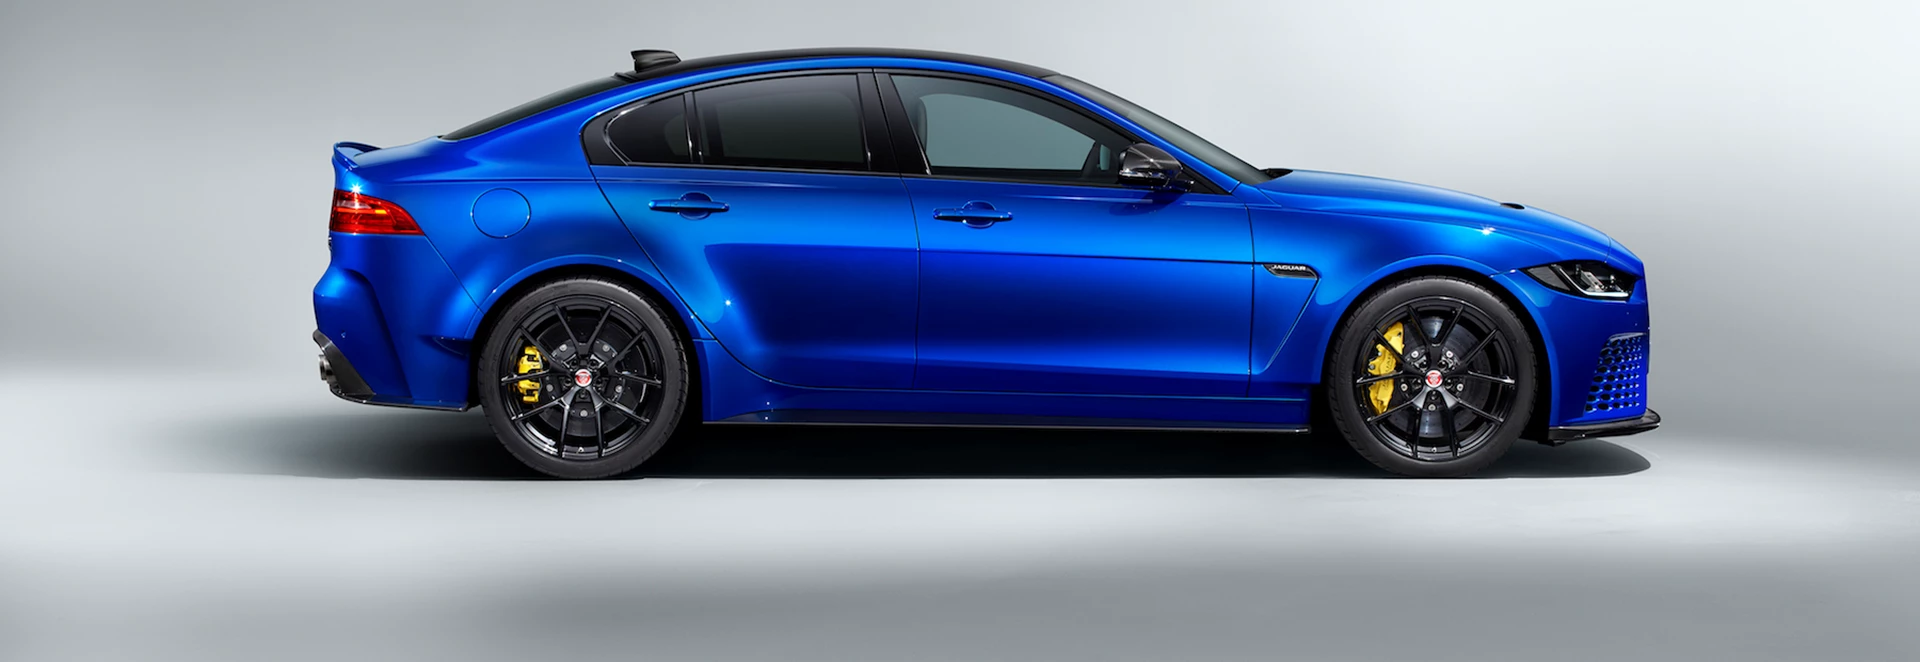 Jaguar unveils new road-focused Touring specification XE SV Project 8 